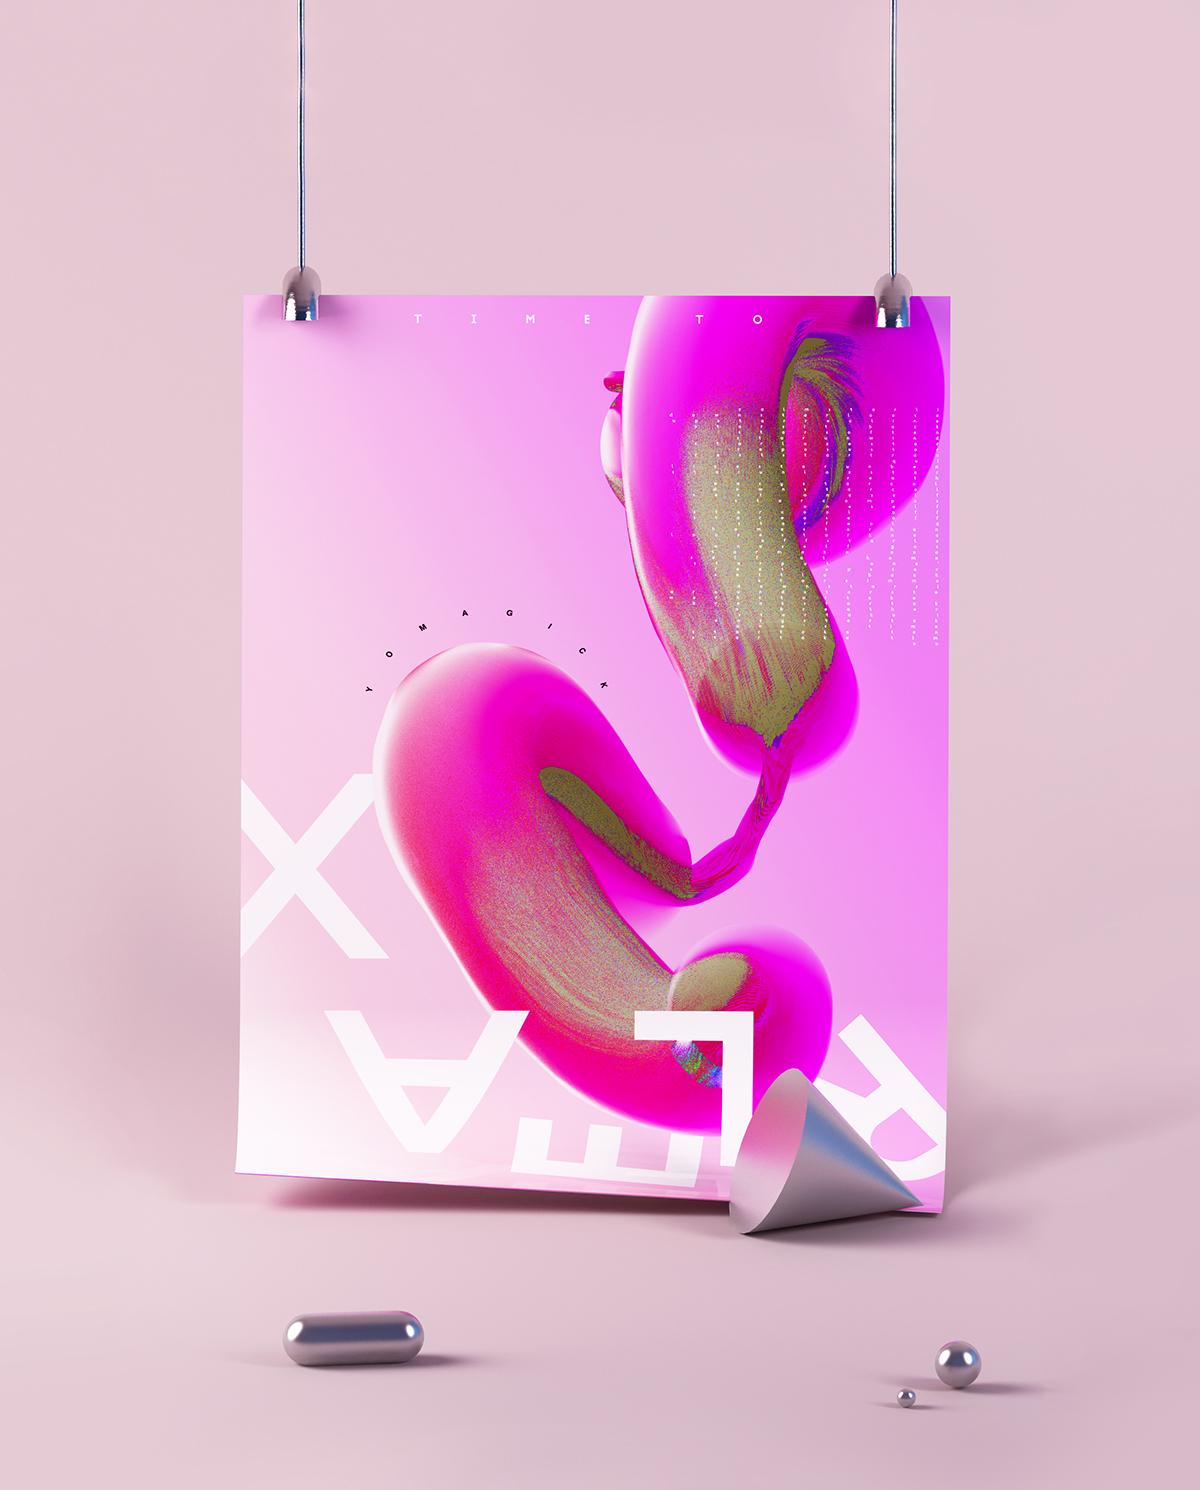 poster cinema 4d type letters Love nice posters yomagick dublin Ireland Render abstract colors colours series wacom